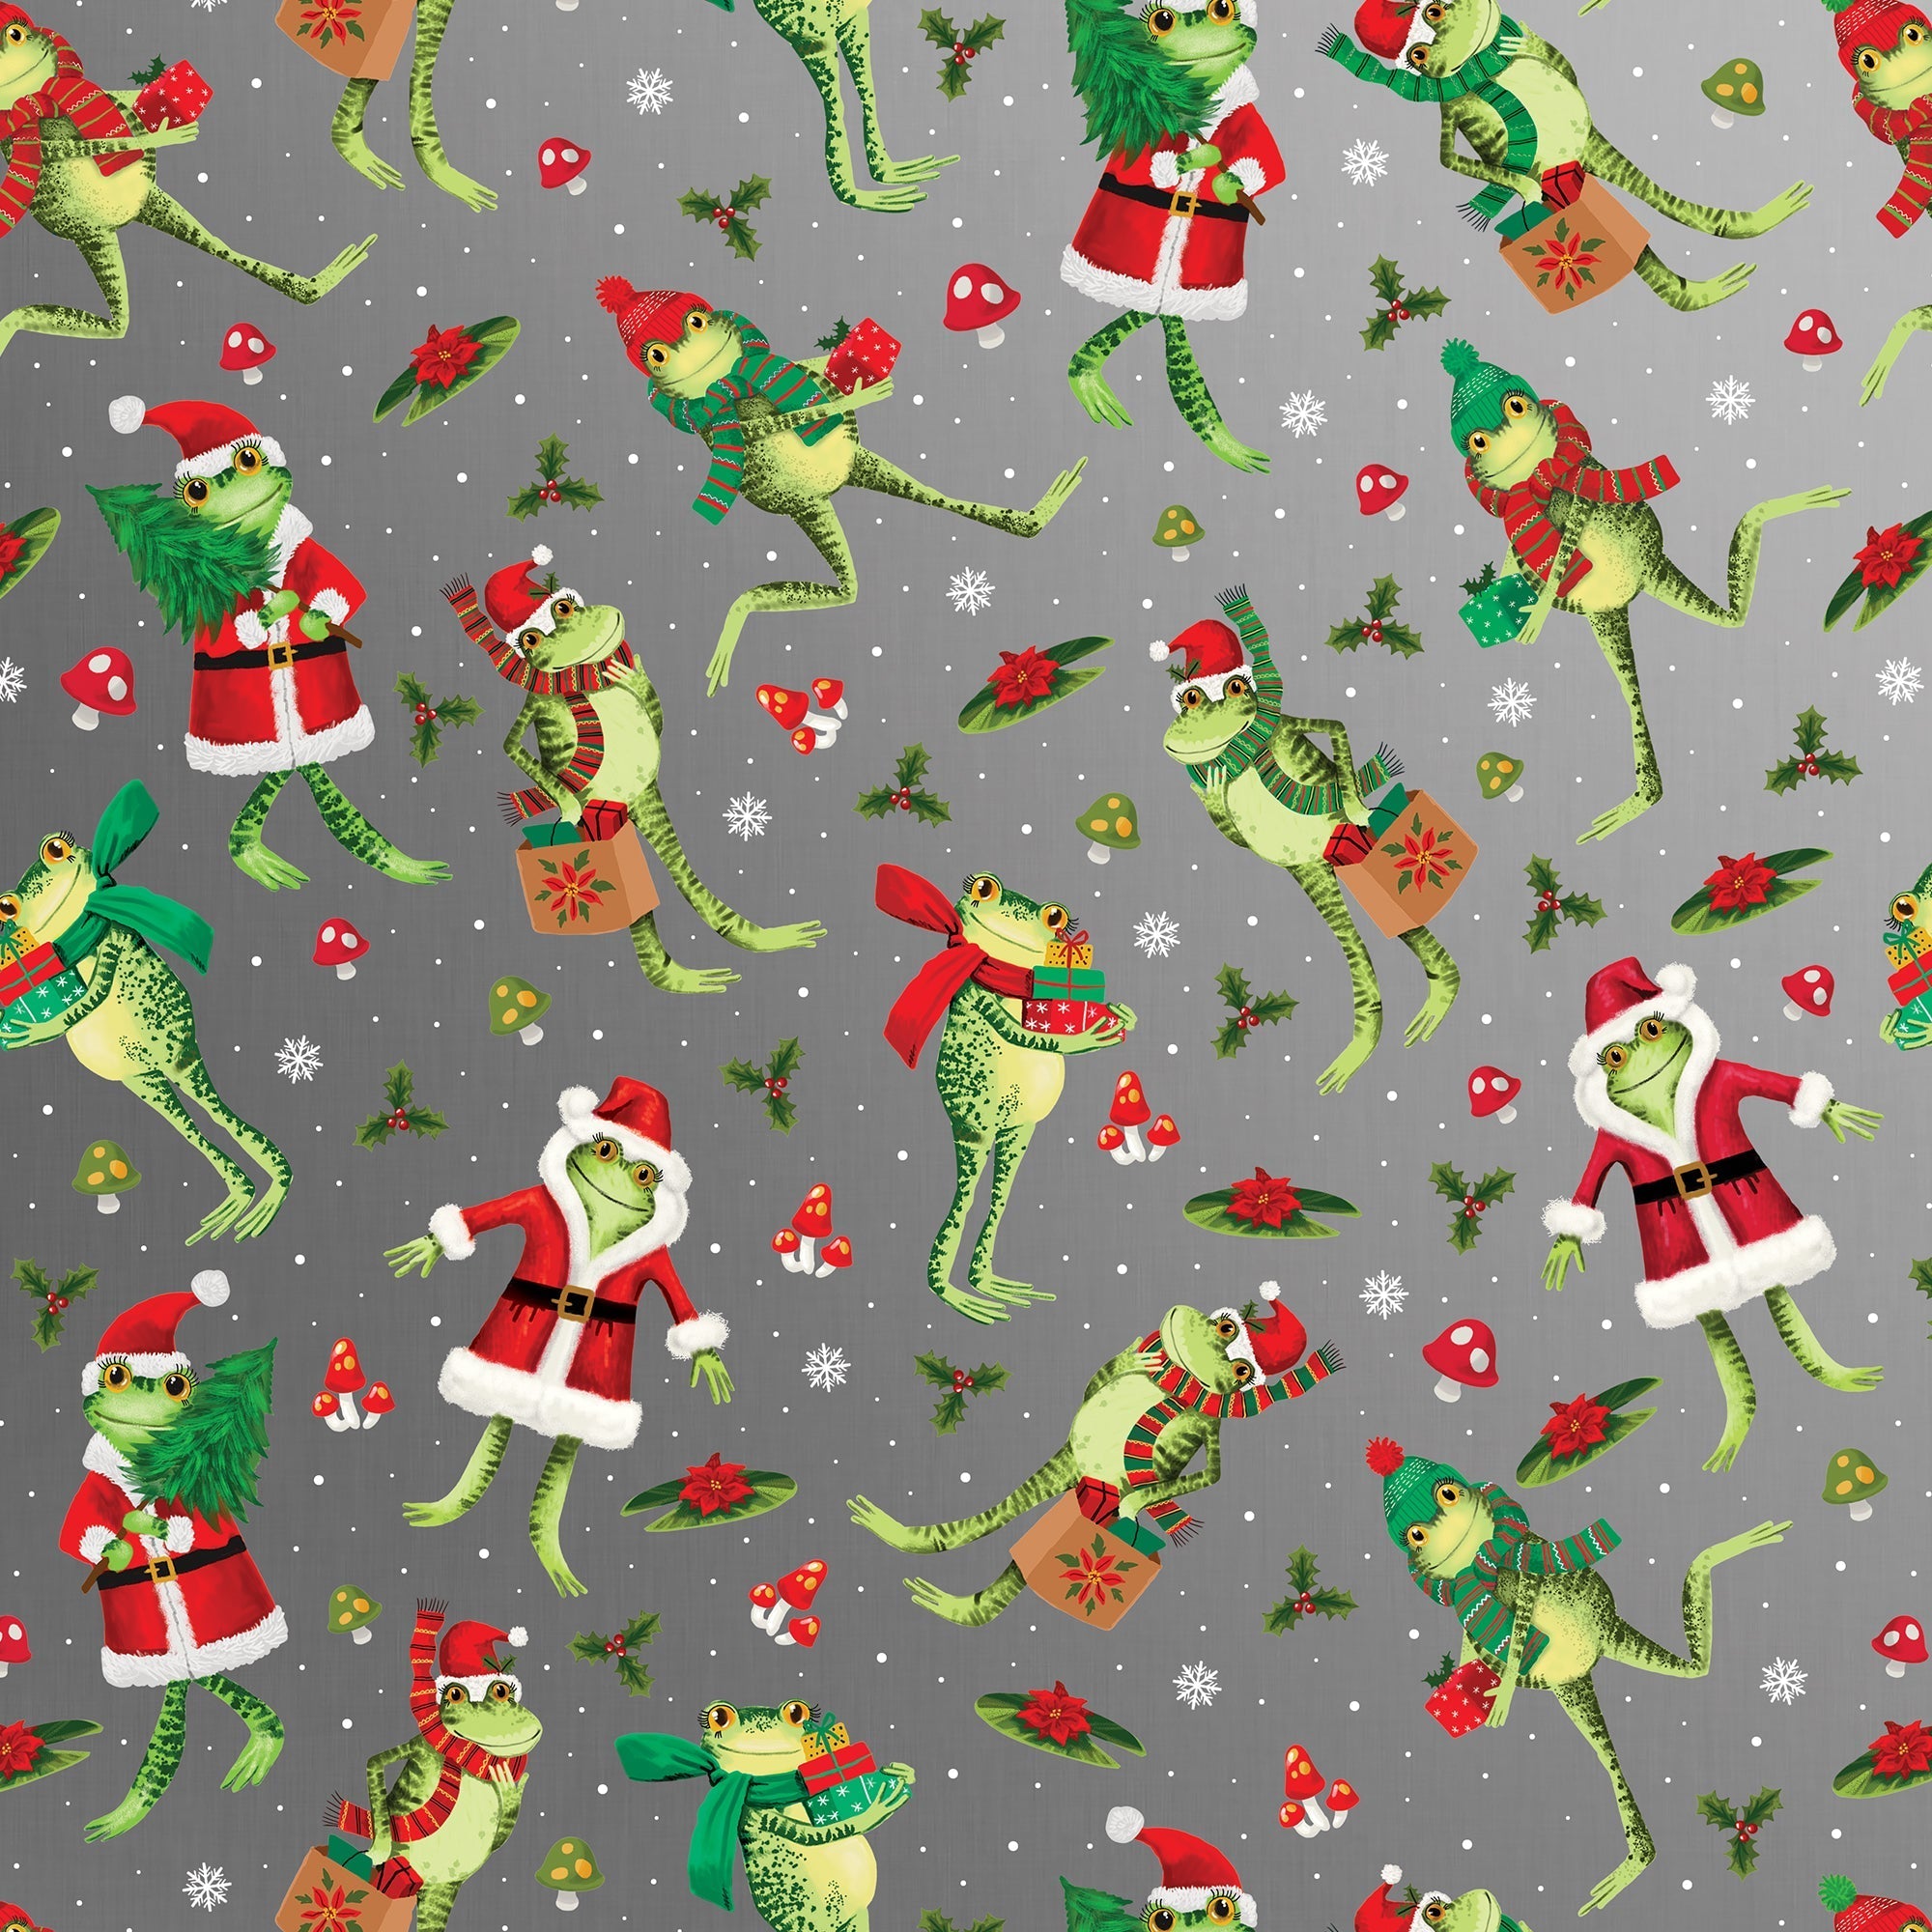 Whimsical Christmas Wrapping Paper Roll Bundle (25 sq ft per roll, 100 total sq ft), 4 Pack